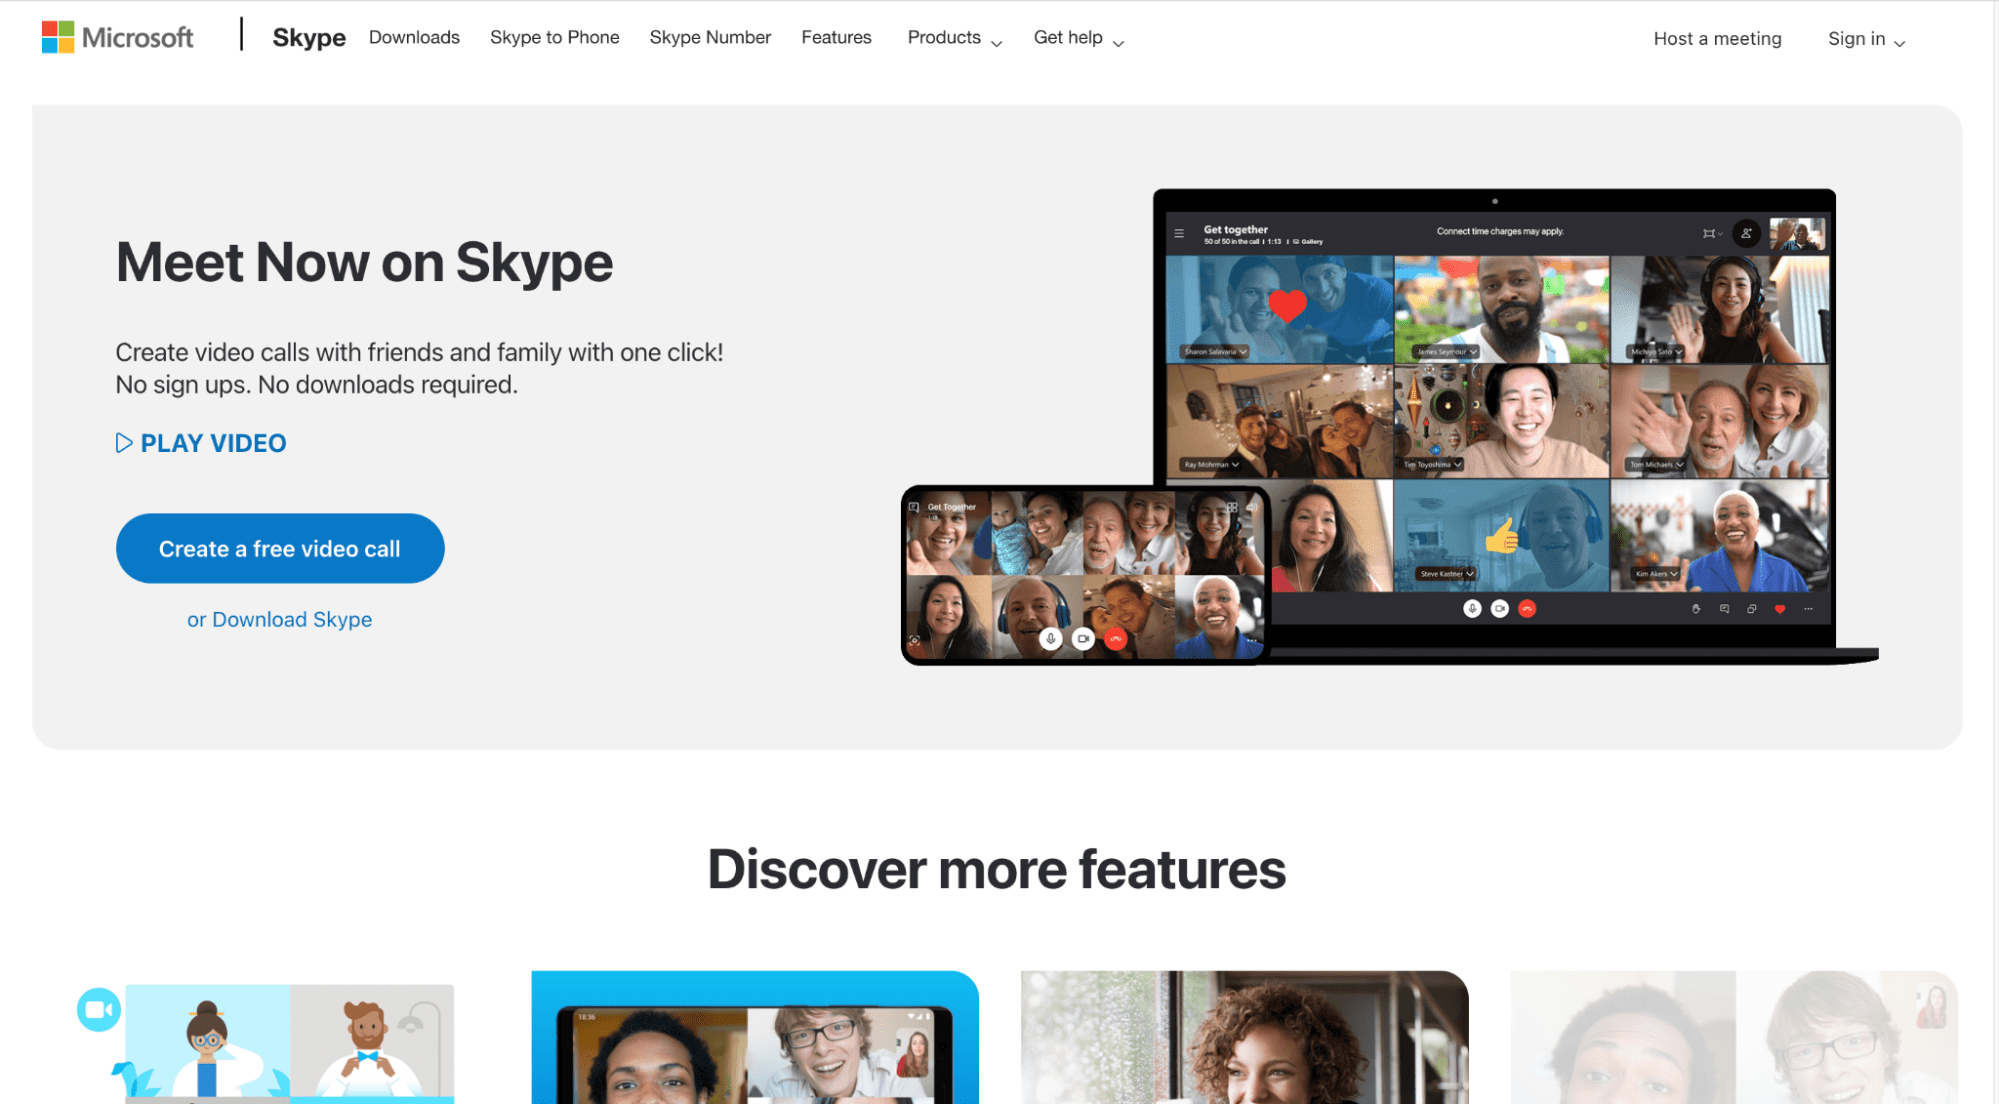 Skype meet now with a video call page.